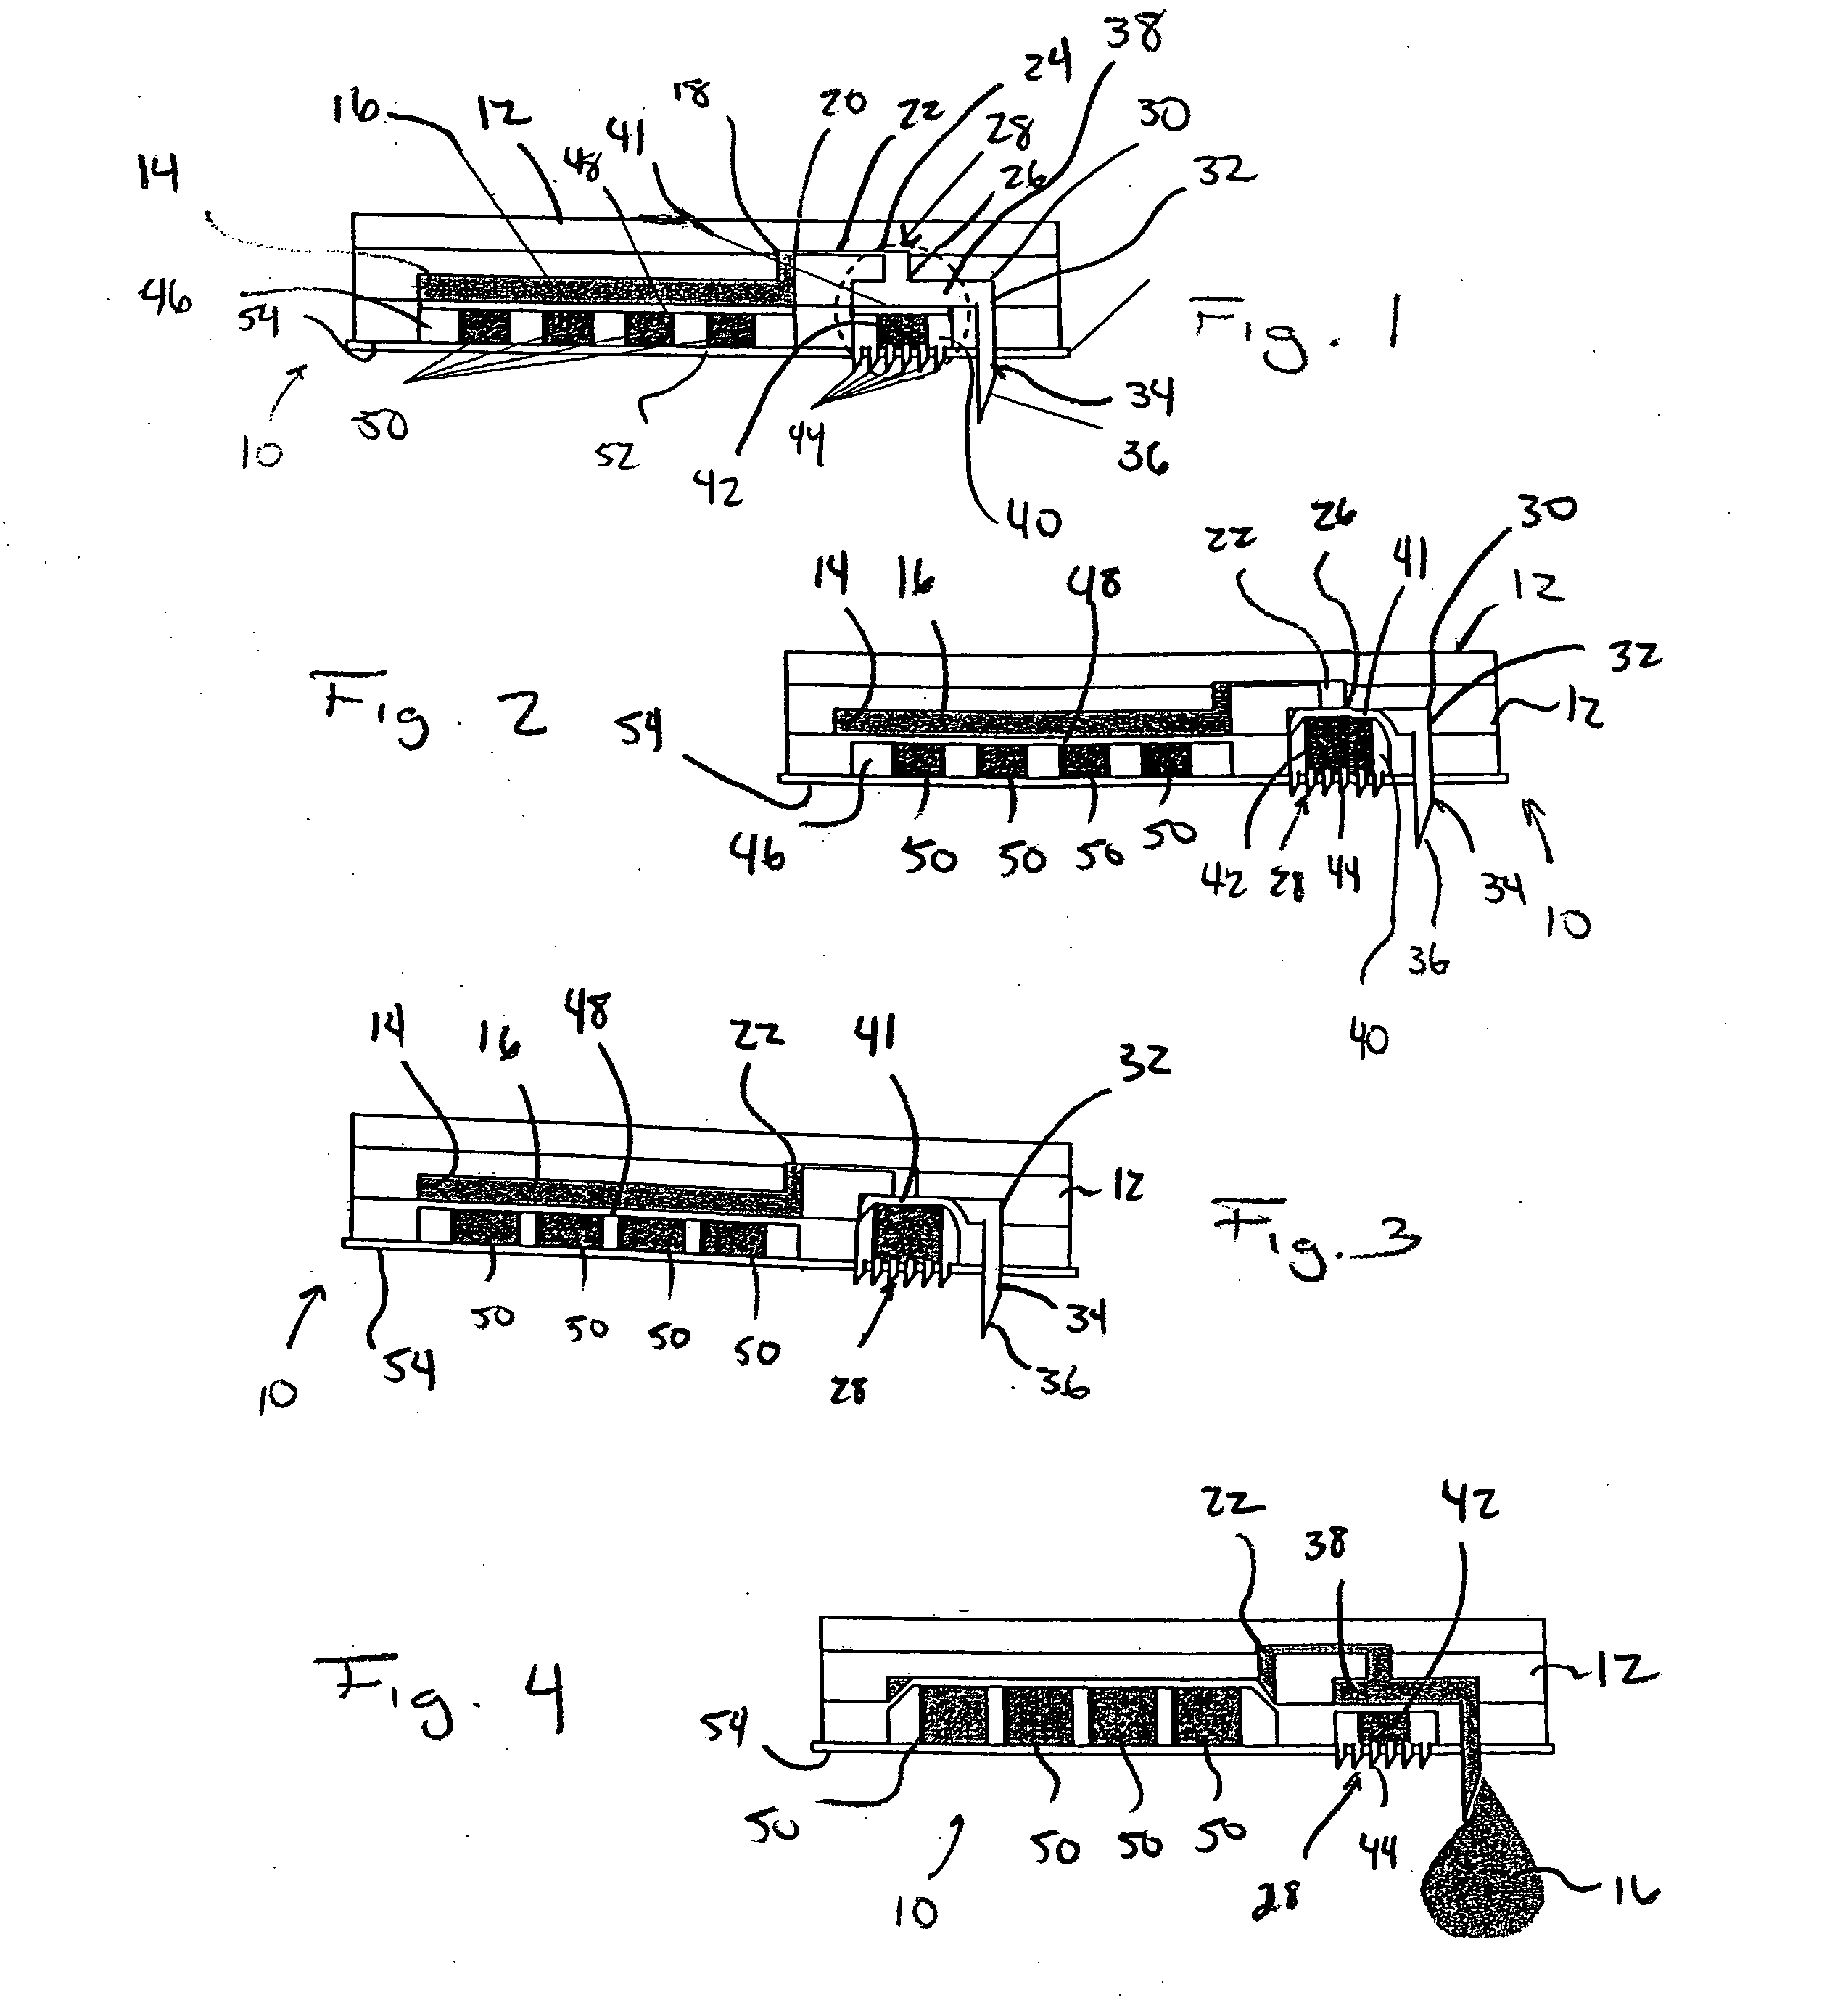 Microfluidic device for drug delivery